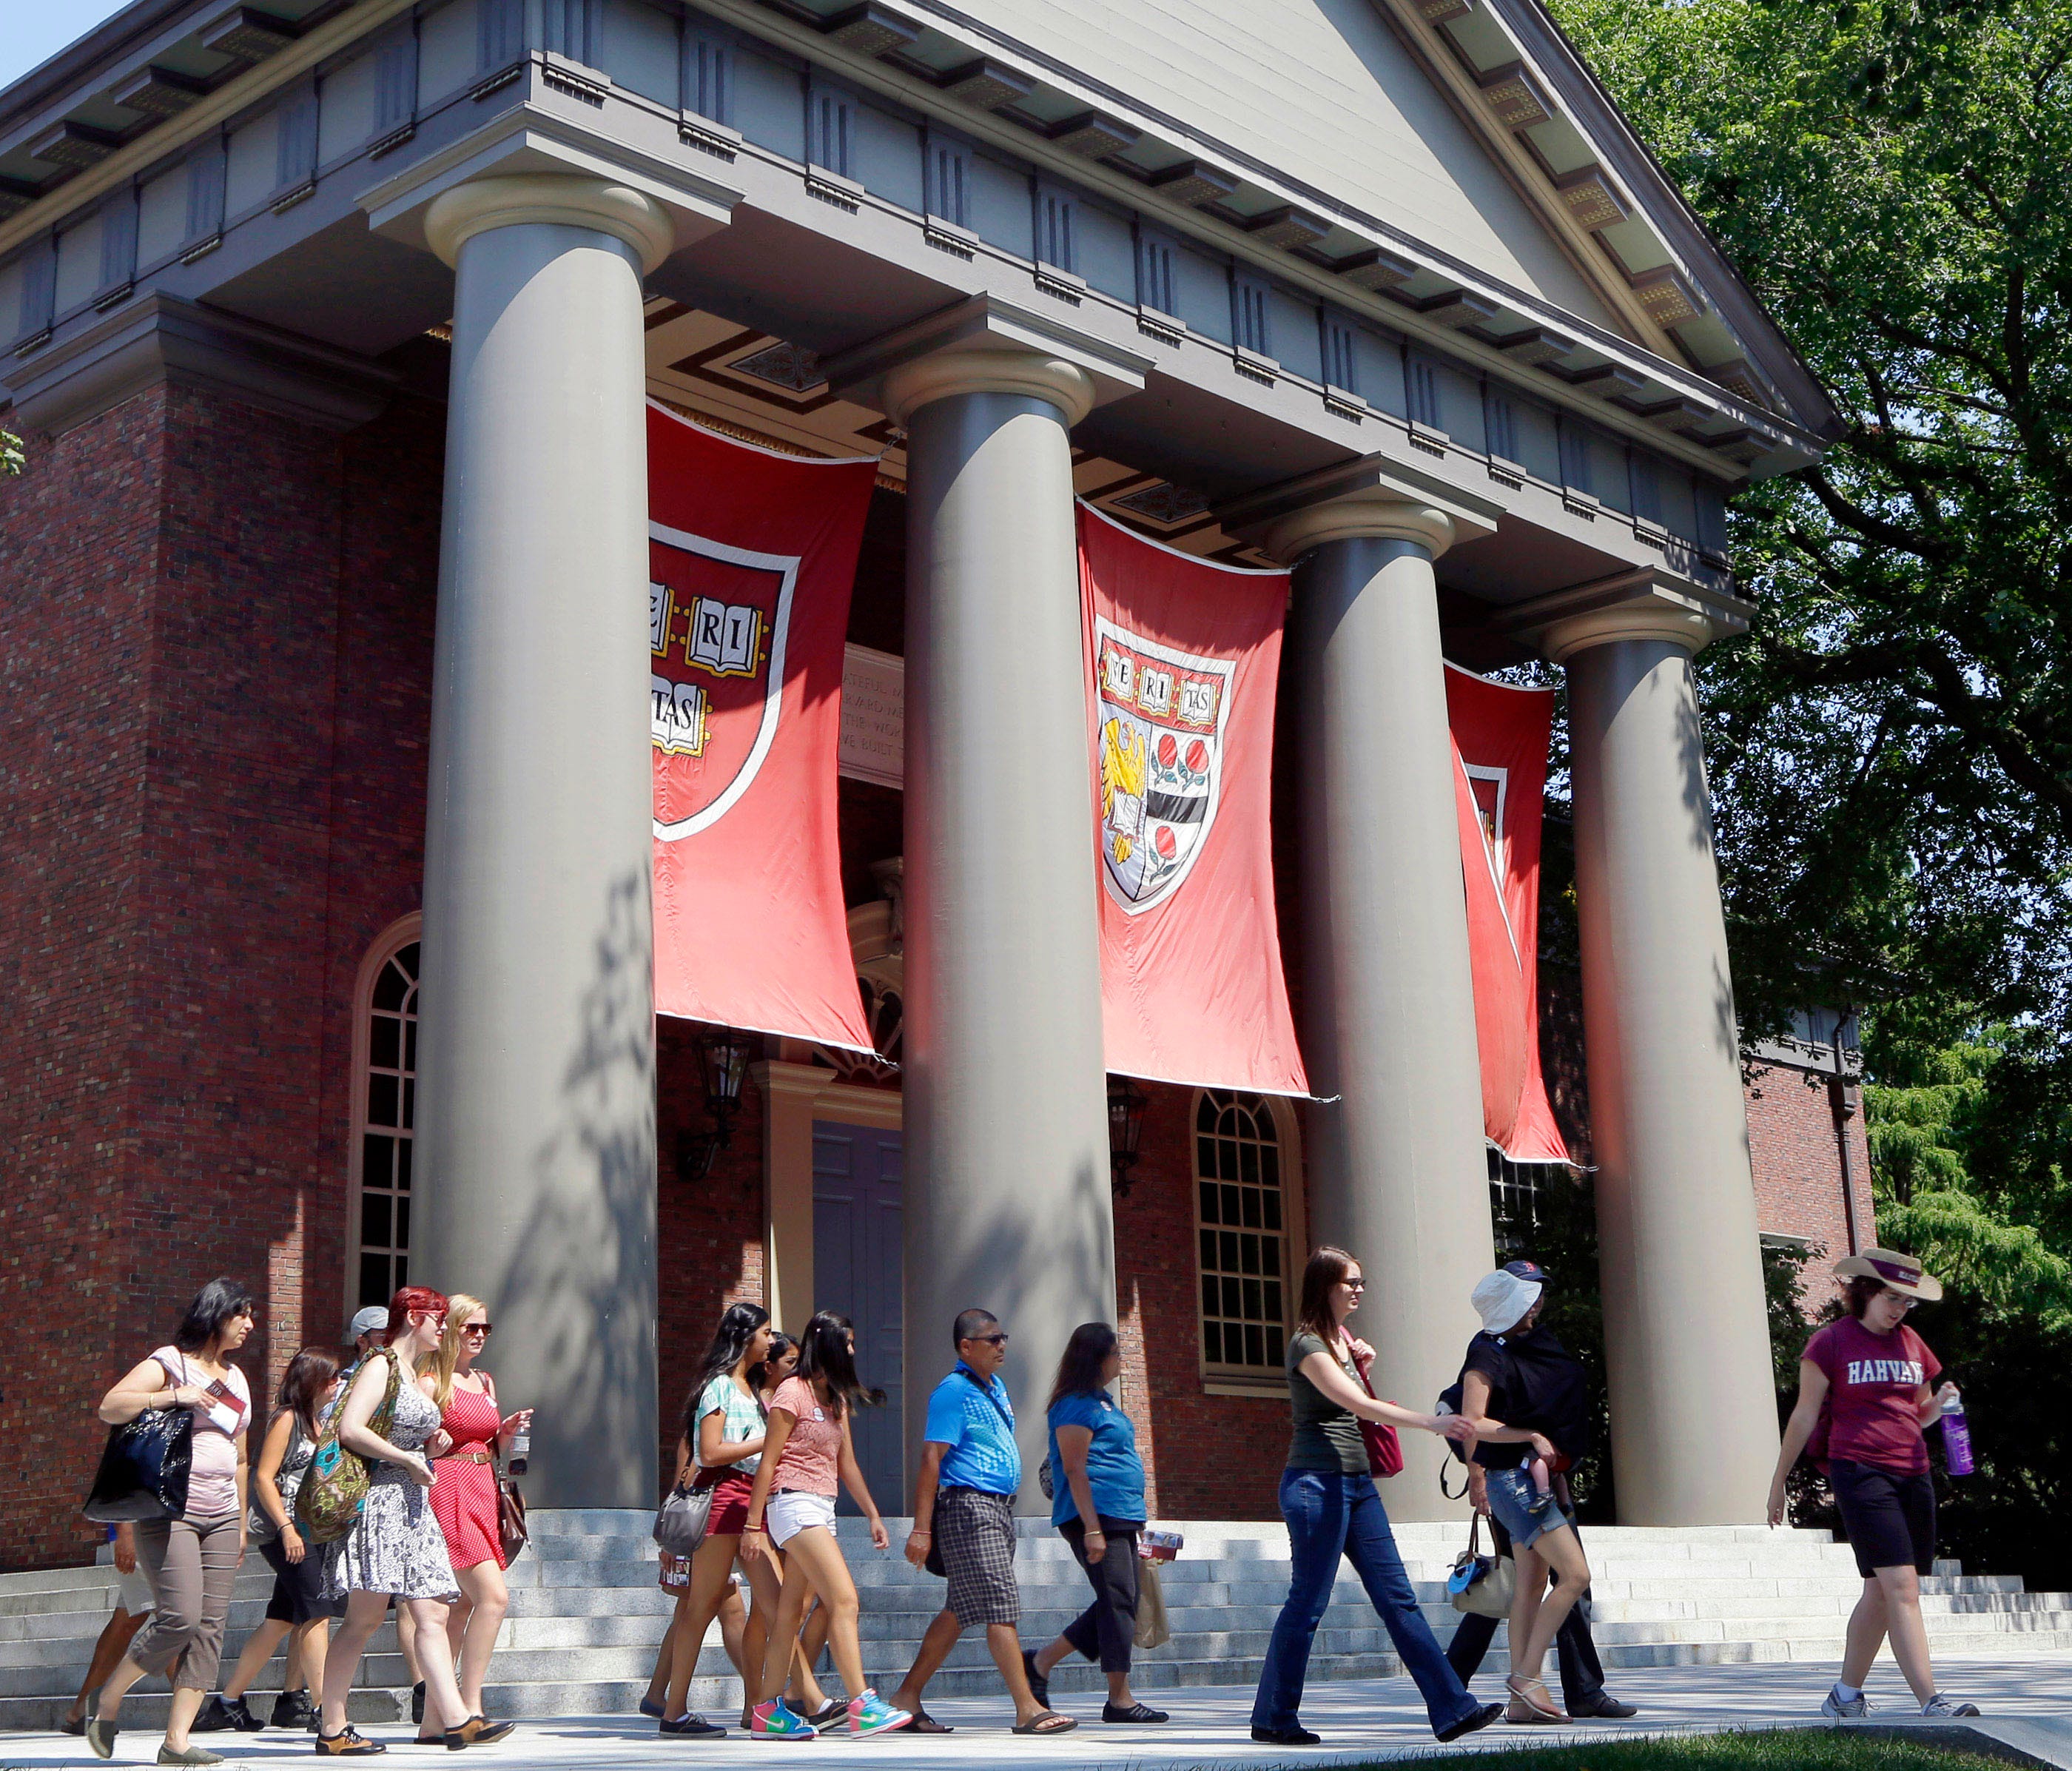 FILE - In this Aug. 30, 2012, file photo, a tour group walks through the campus of Harvard University in Cambridge, Mass. Word of an August 2017 Justice Department inquiry into how race factors into admissions at Harvard University has left top-tier 